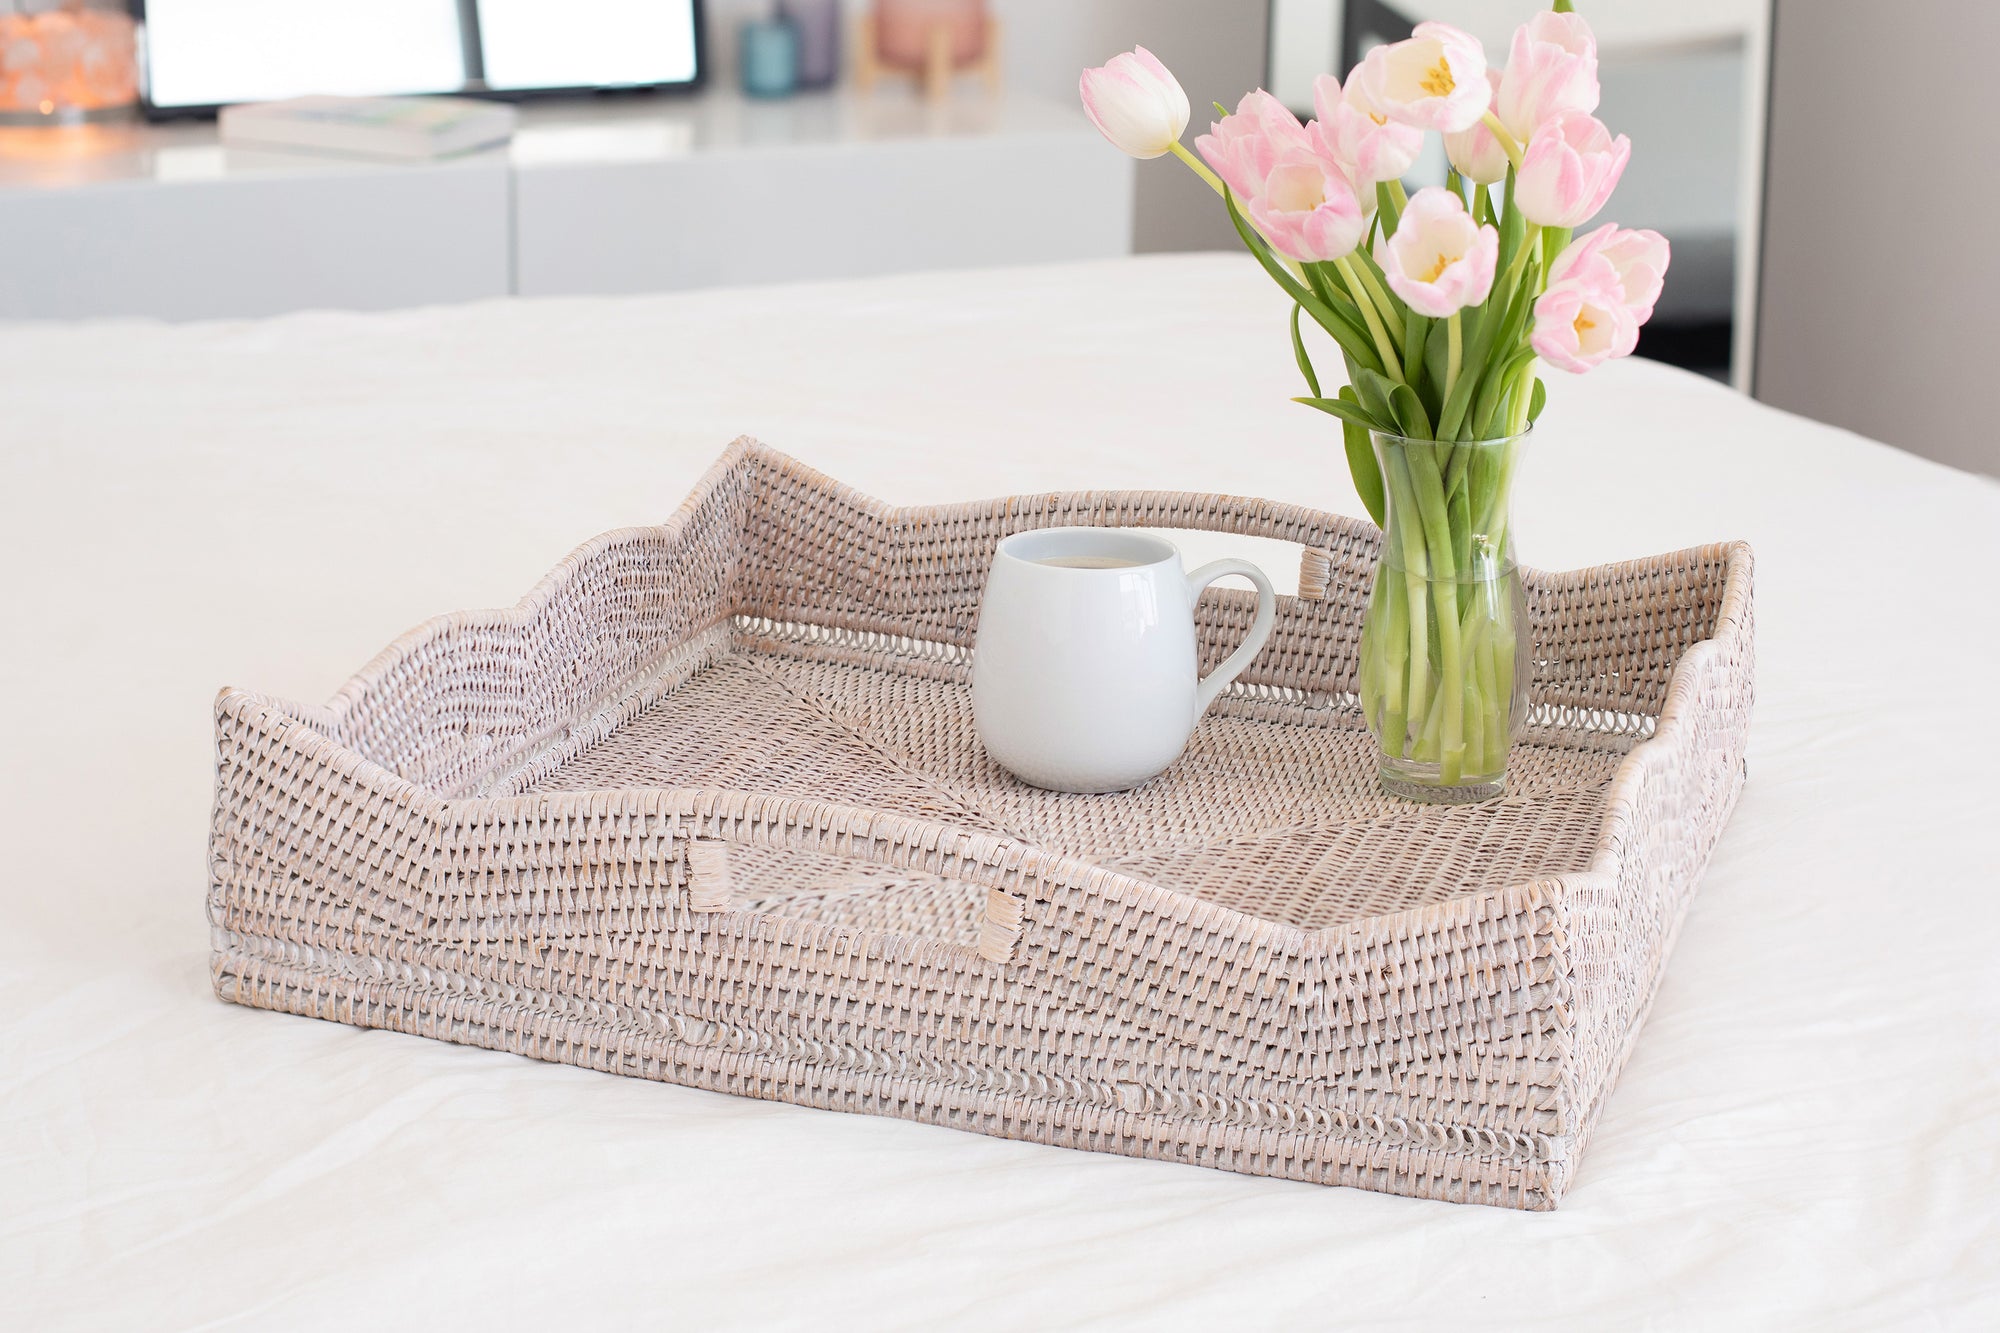 Scallop Square Tray With Cutout Handles White Wash